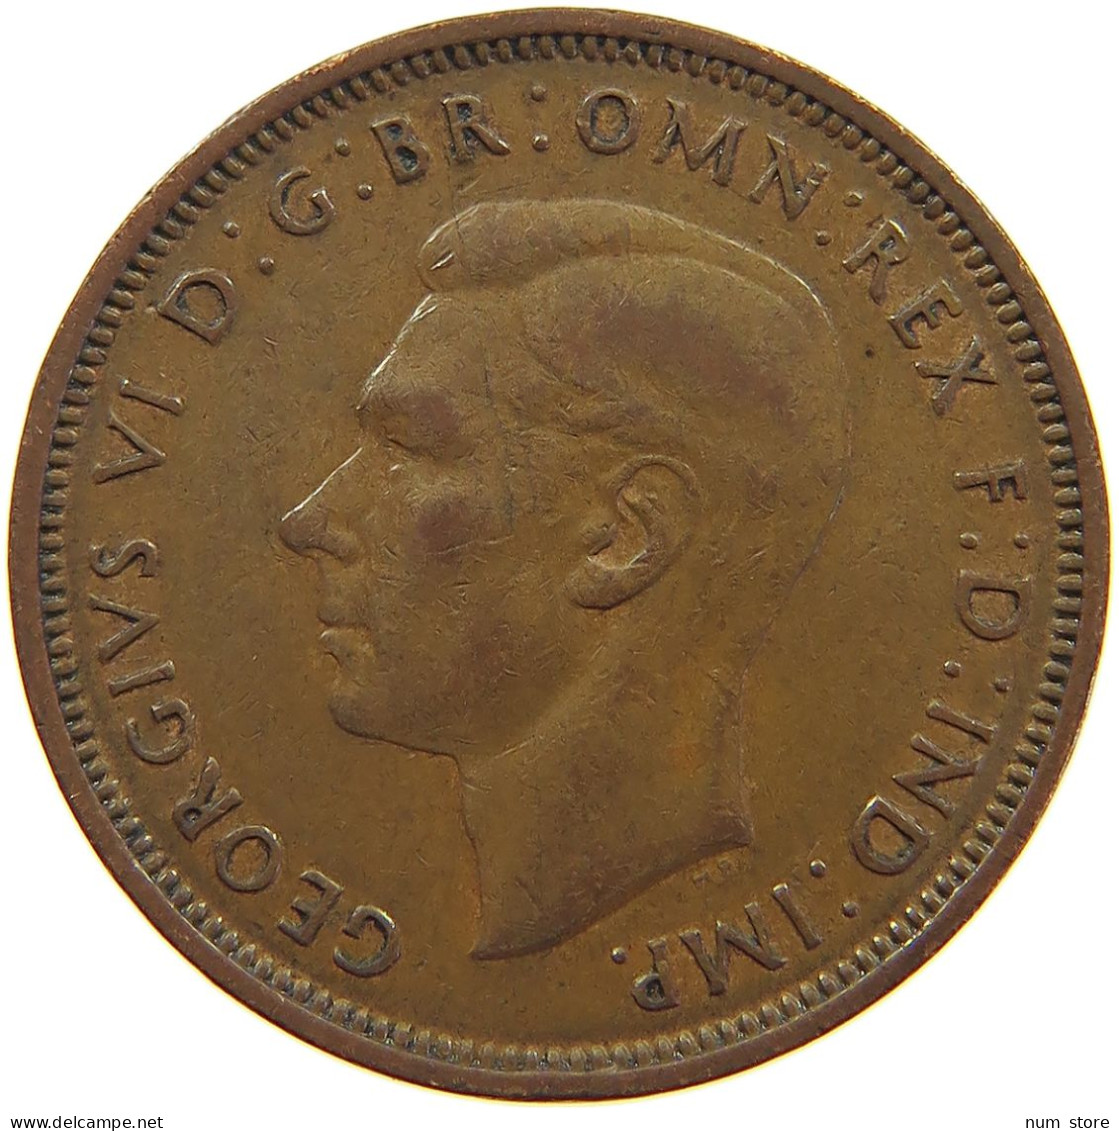 GREAT BRITAIN HALFPENNY 1944 #a062 0477 - C. 1/2 Penny